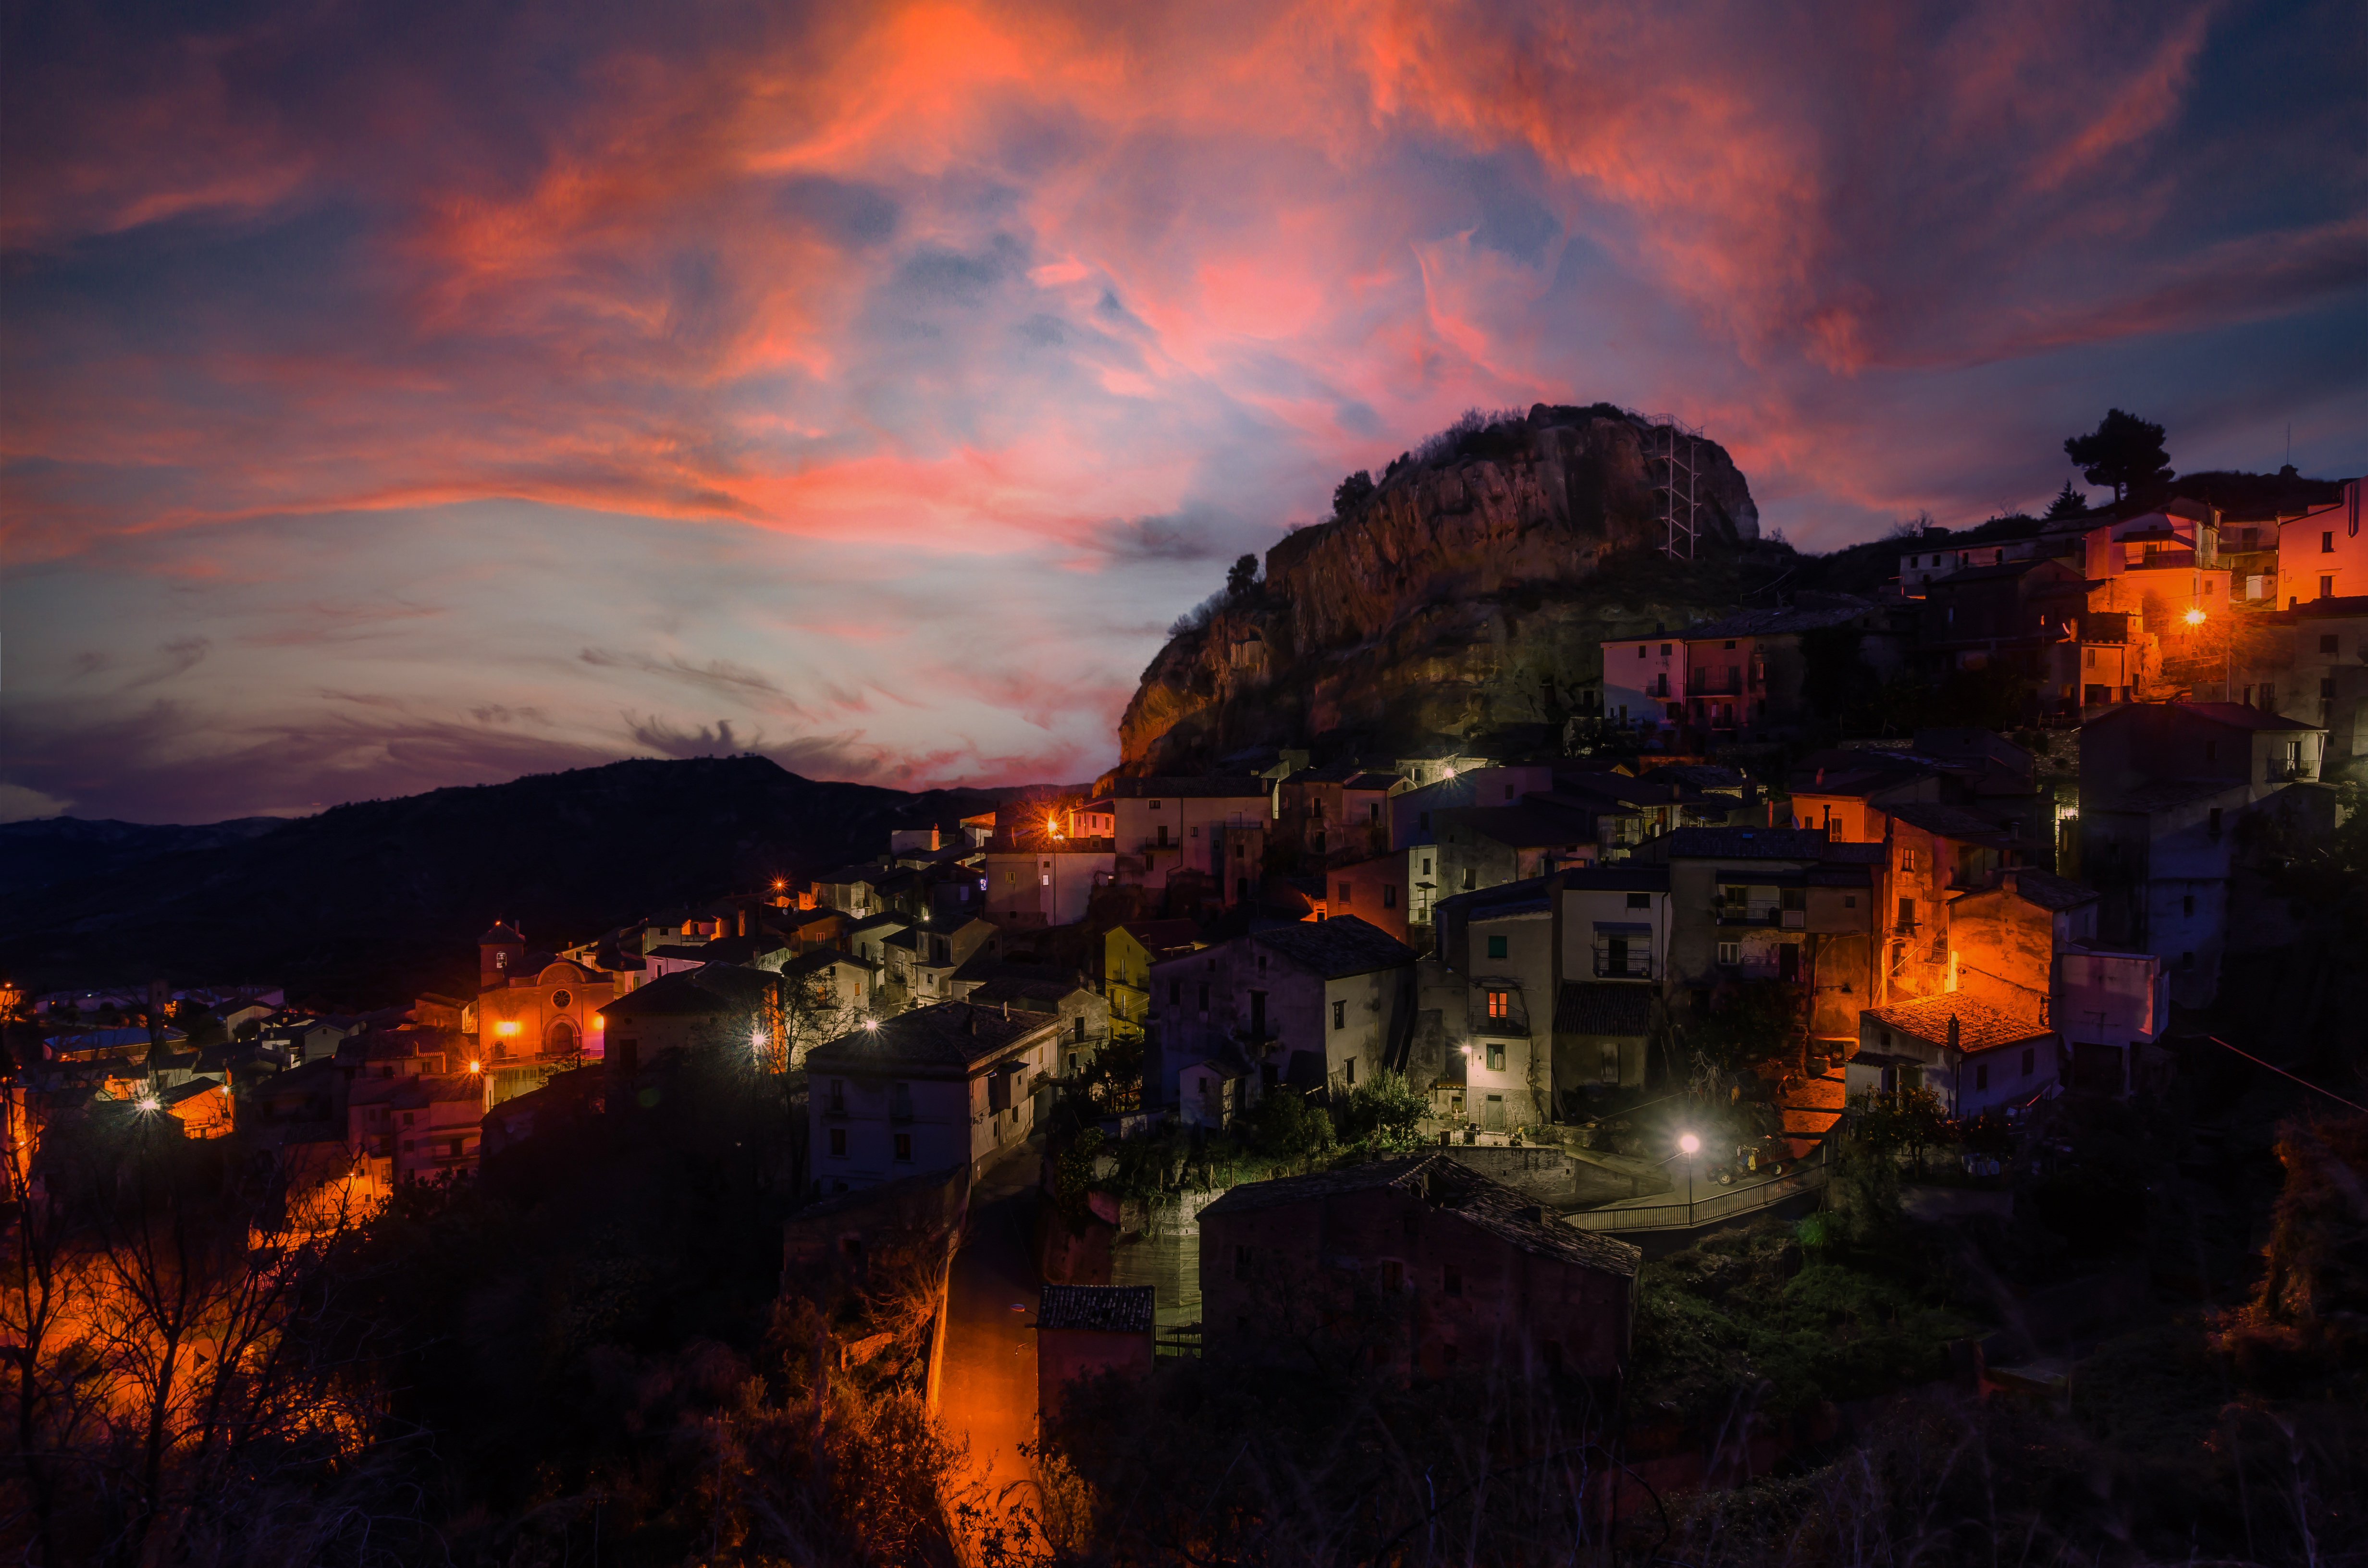 Wallpaper, Calabria, Italy, sunset, lights, landscape, clouds 4928x3264